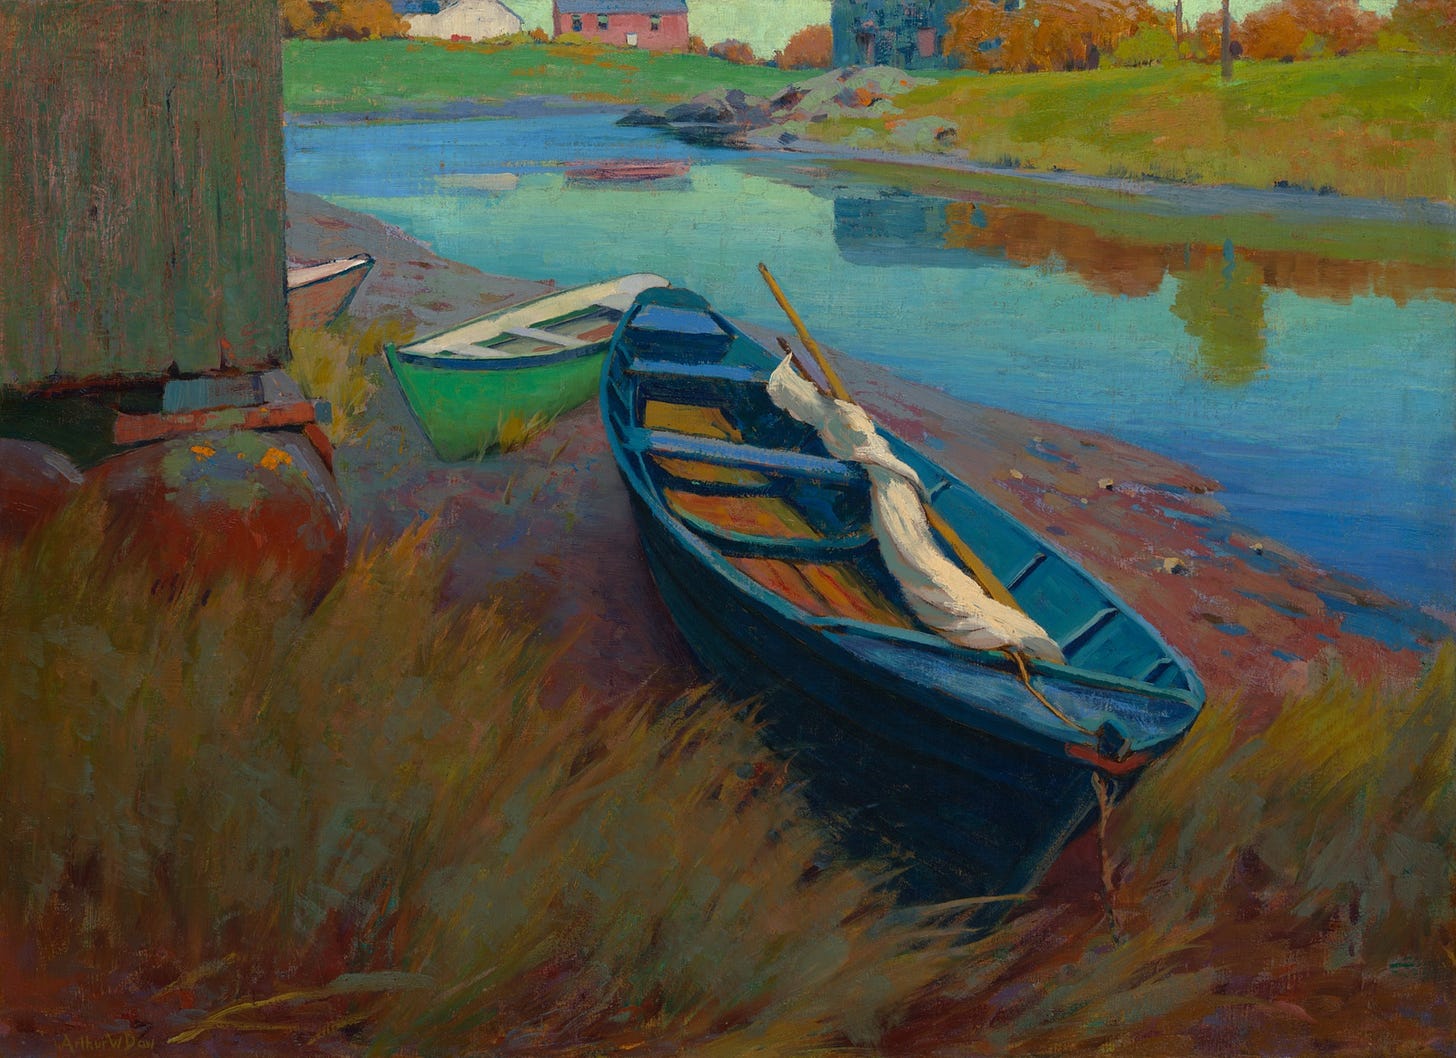 Take a closer look — What ‘objects’ do you see first when you take in the picture? What patterns can you identify? How are color and light used to create depth?  What are the ‘sections’ of this painting? What role do the artists brush style play in creating mood? What cultural traditions do you see represented, and in what way?
Boats at Rest | Arthur Wesley Dow | 1895, oil on canvas  